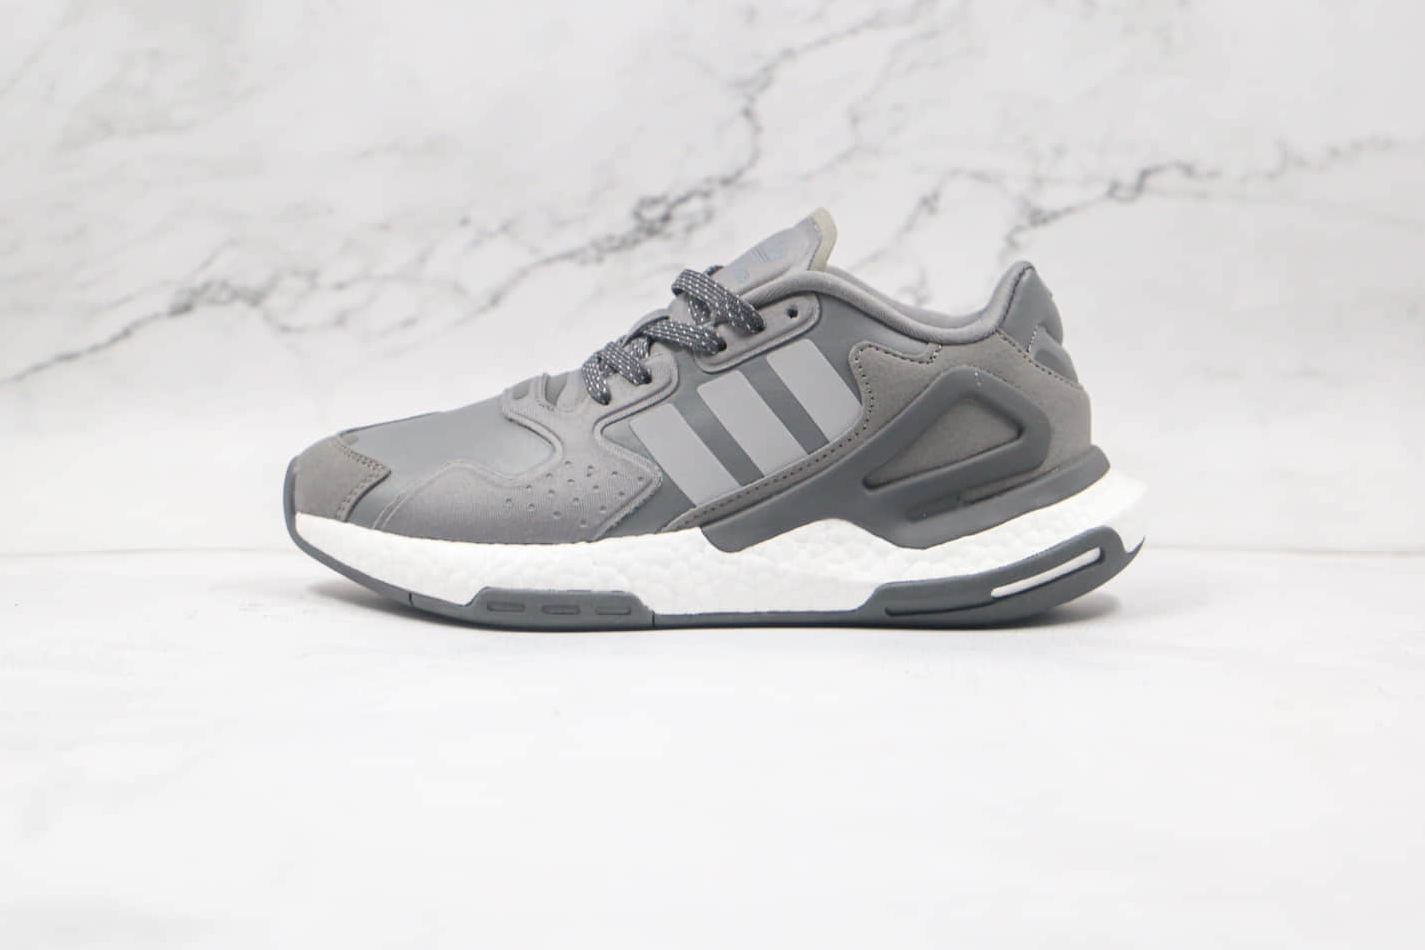 Adidas Originals Day Jogger Boost Core Black Grey FW4822 - Stylish Comfort for Modern Runners